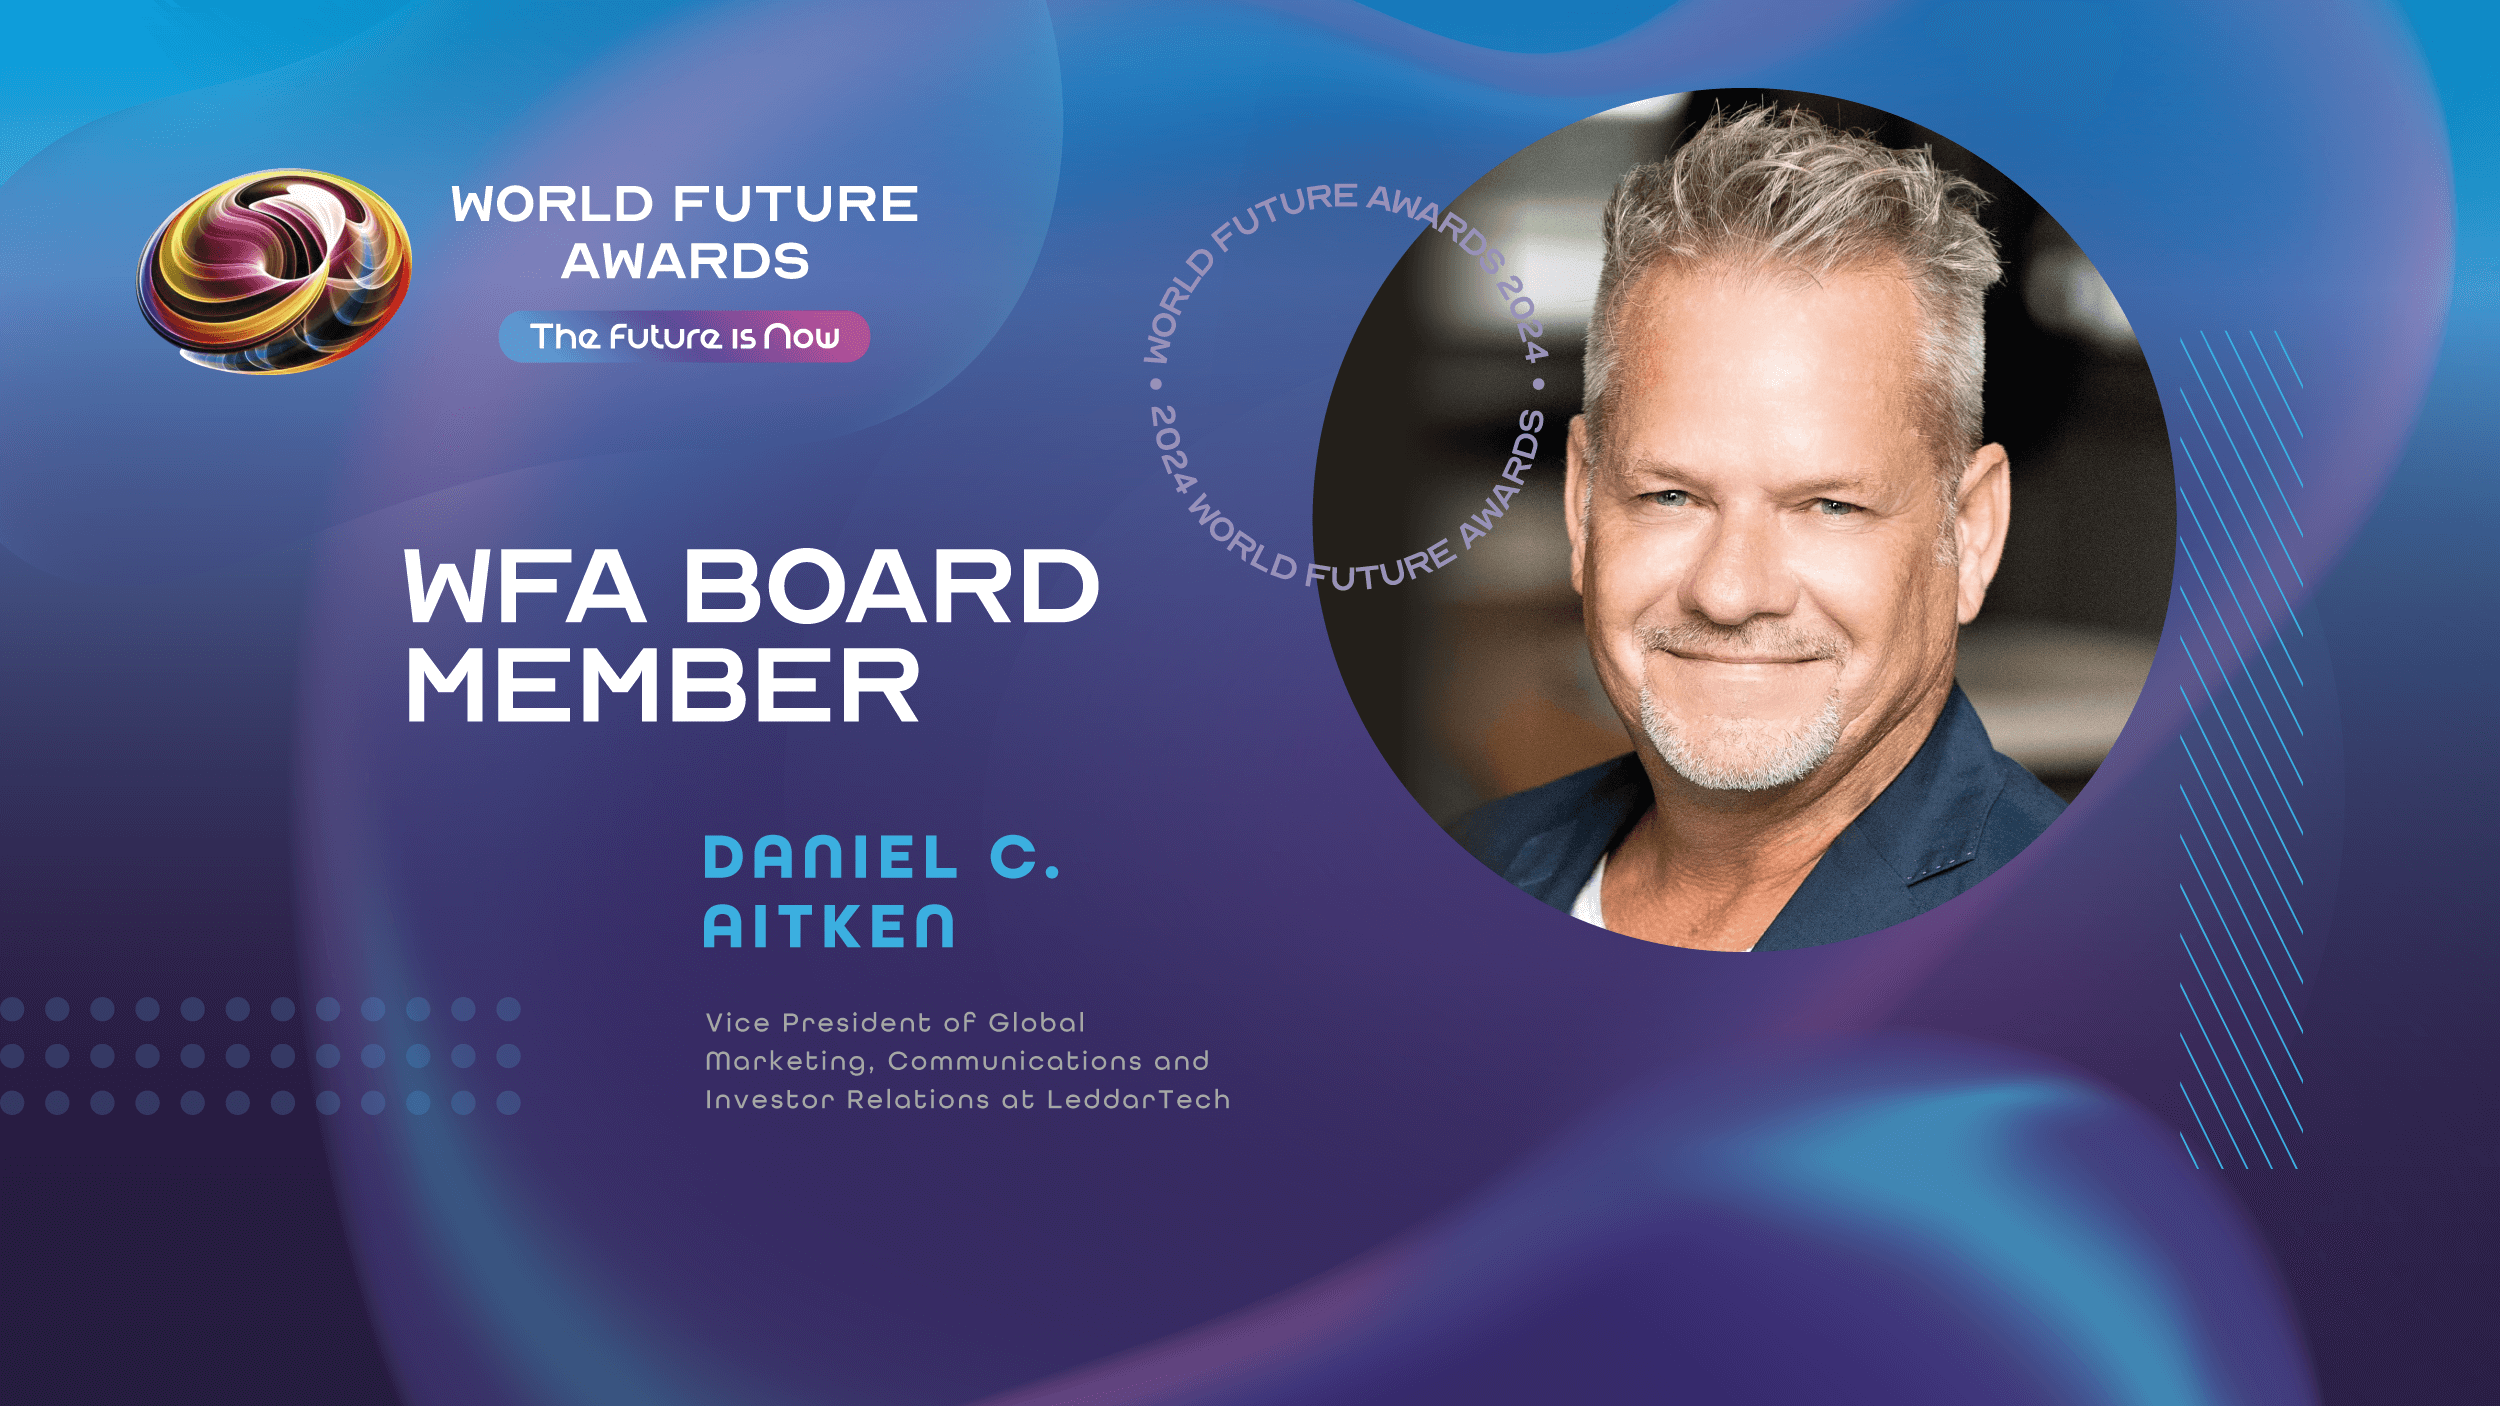 Daniel C. Aitken Joins World Future Awards Board: A Visionary Leader in Global Marketing and Technology